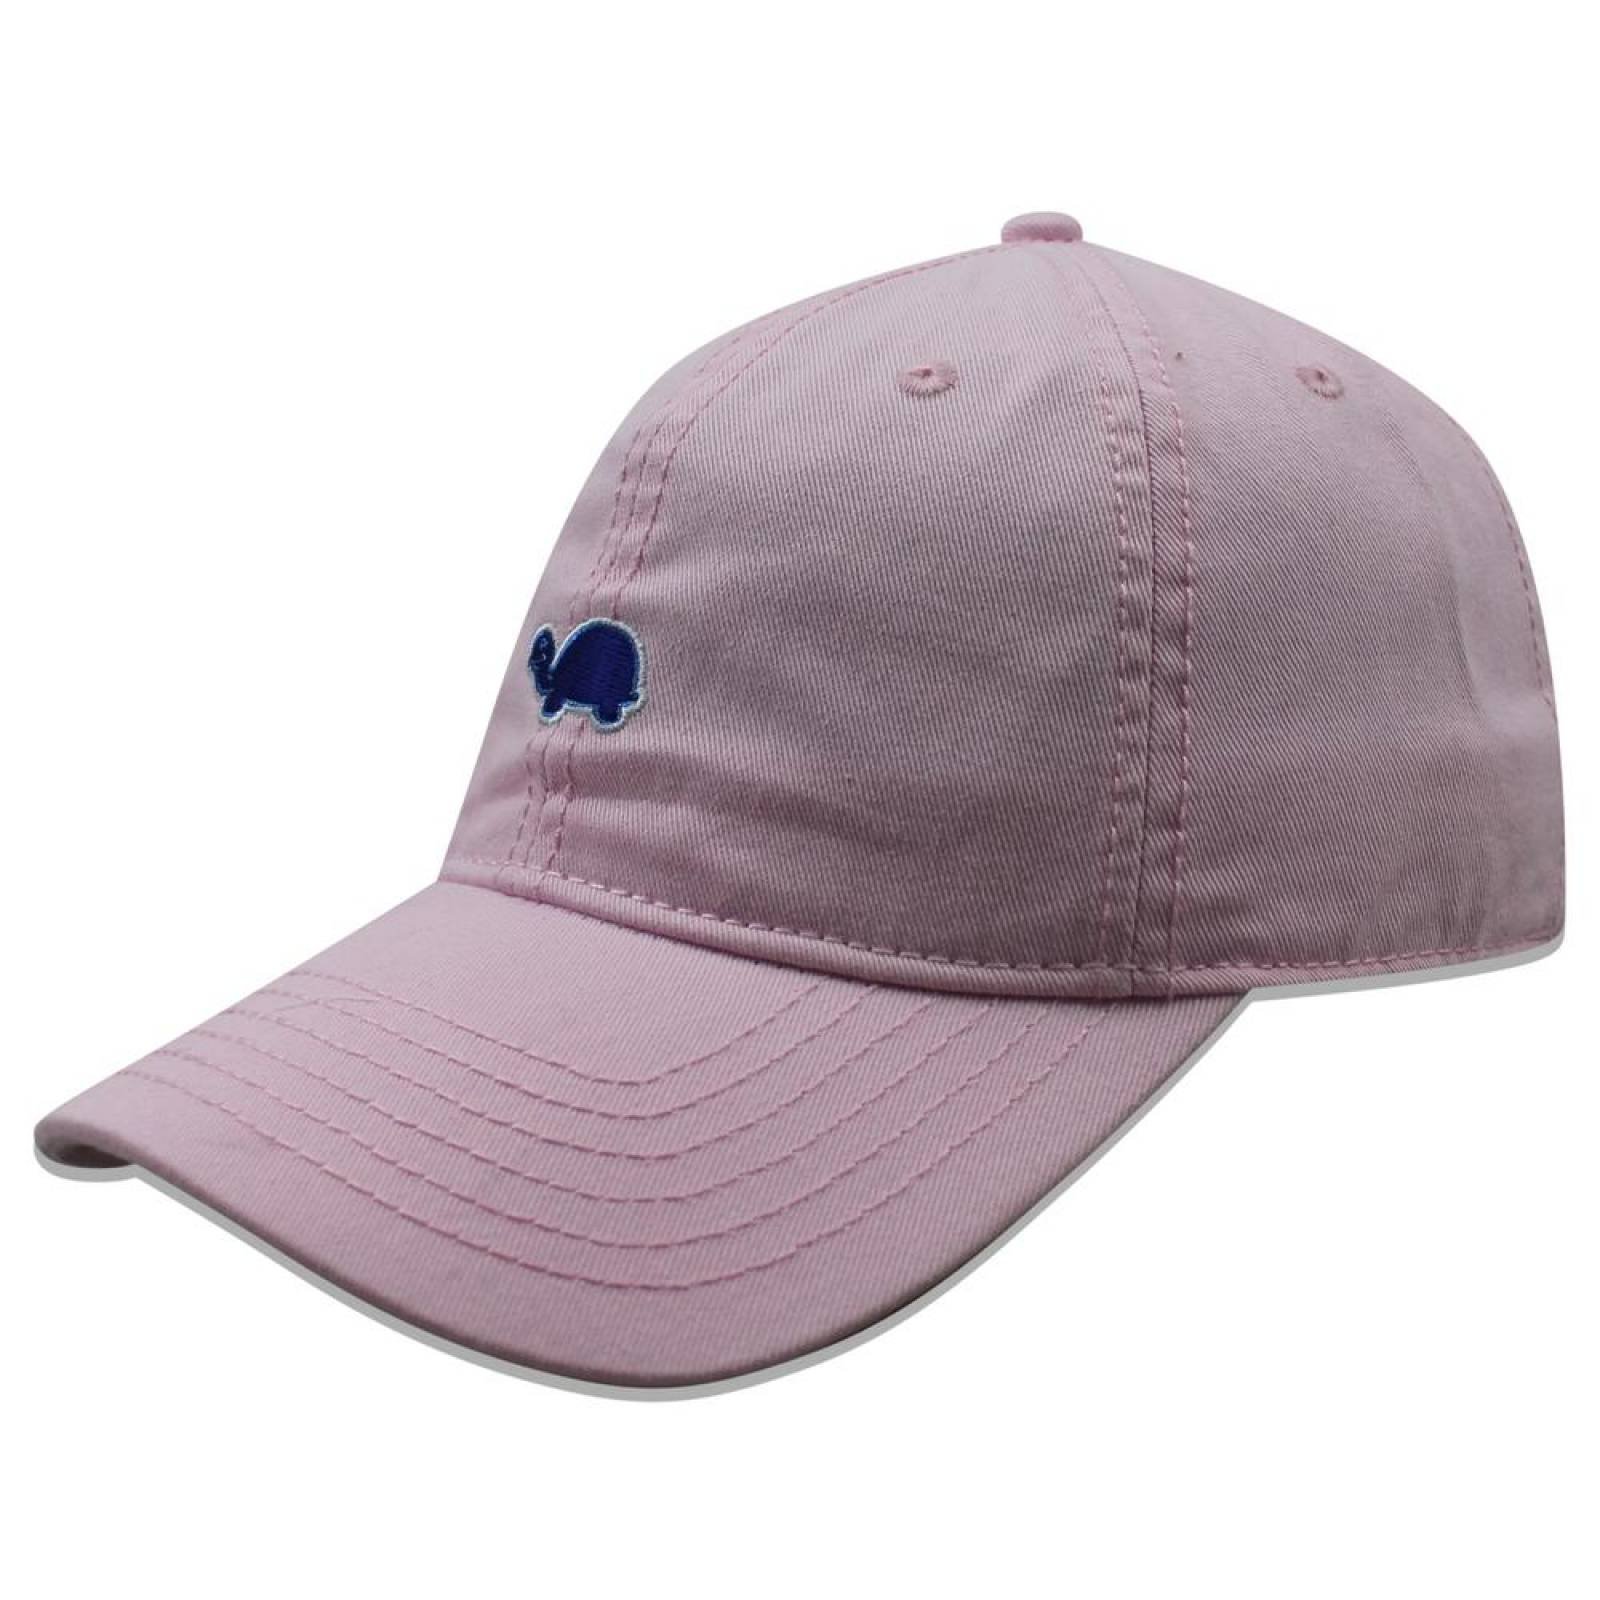 Gorra Concept One Coopers Cove Rosa 